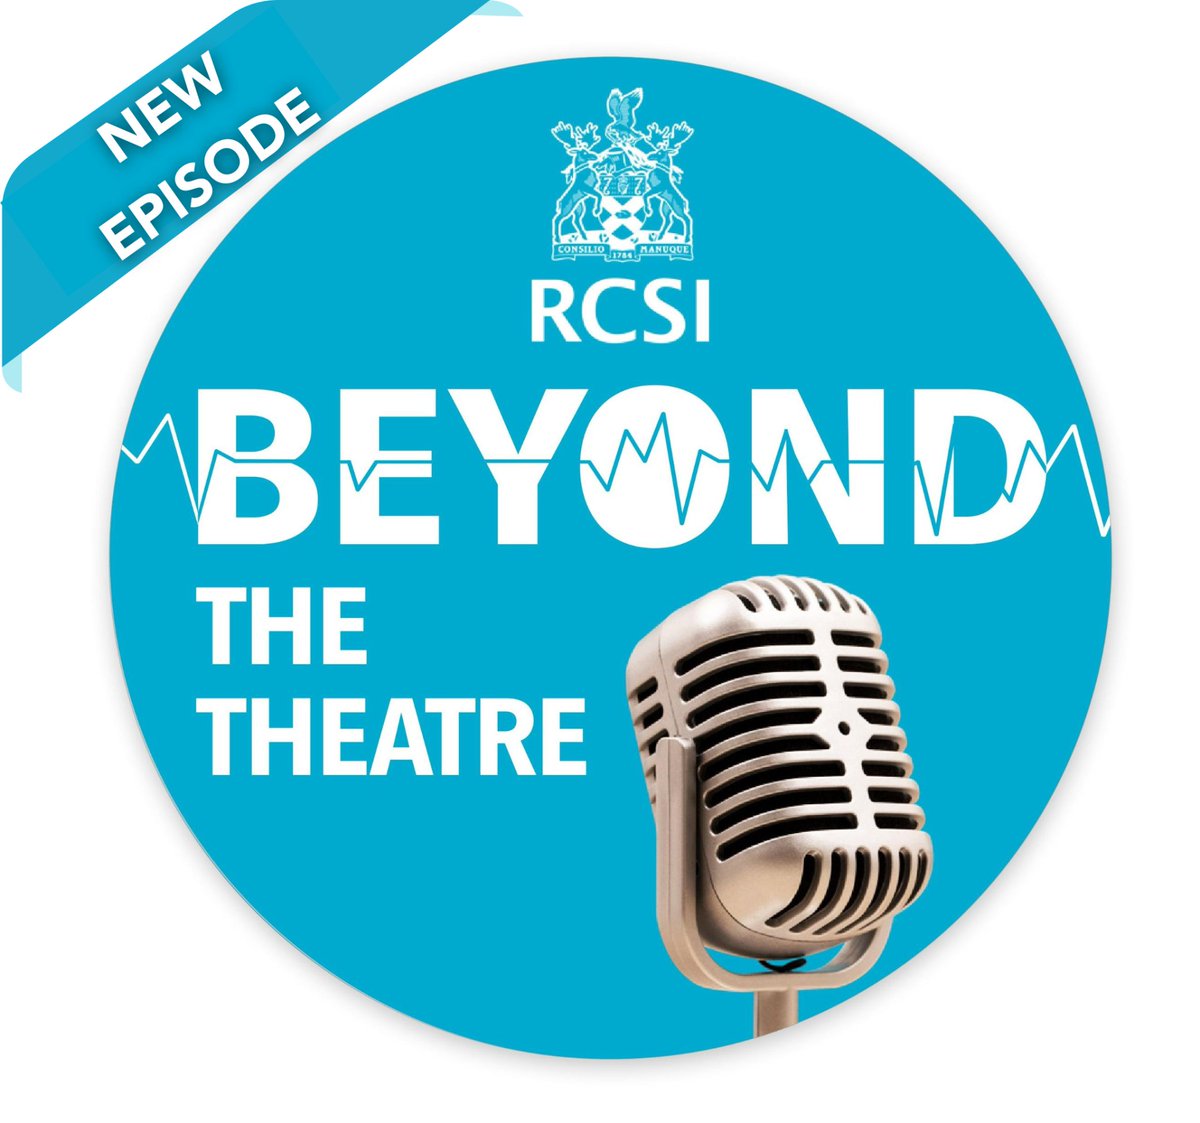 Beyond the Theatre episode 2 with Jack Kavanagh This podcast examines the importance of self-care resilience & examines how doctors can provide support for those with life changing injuries. msurgery.ie/home/beyond-th…